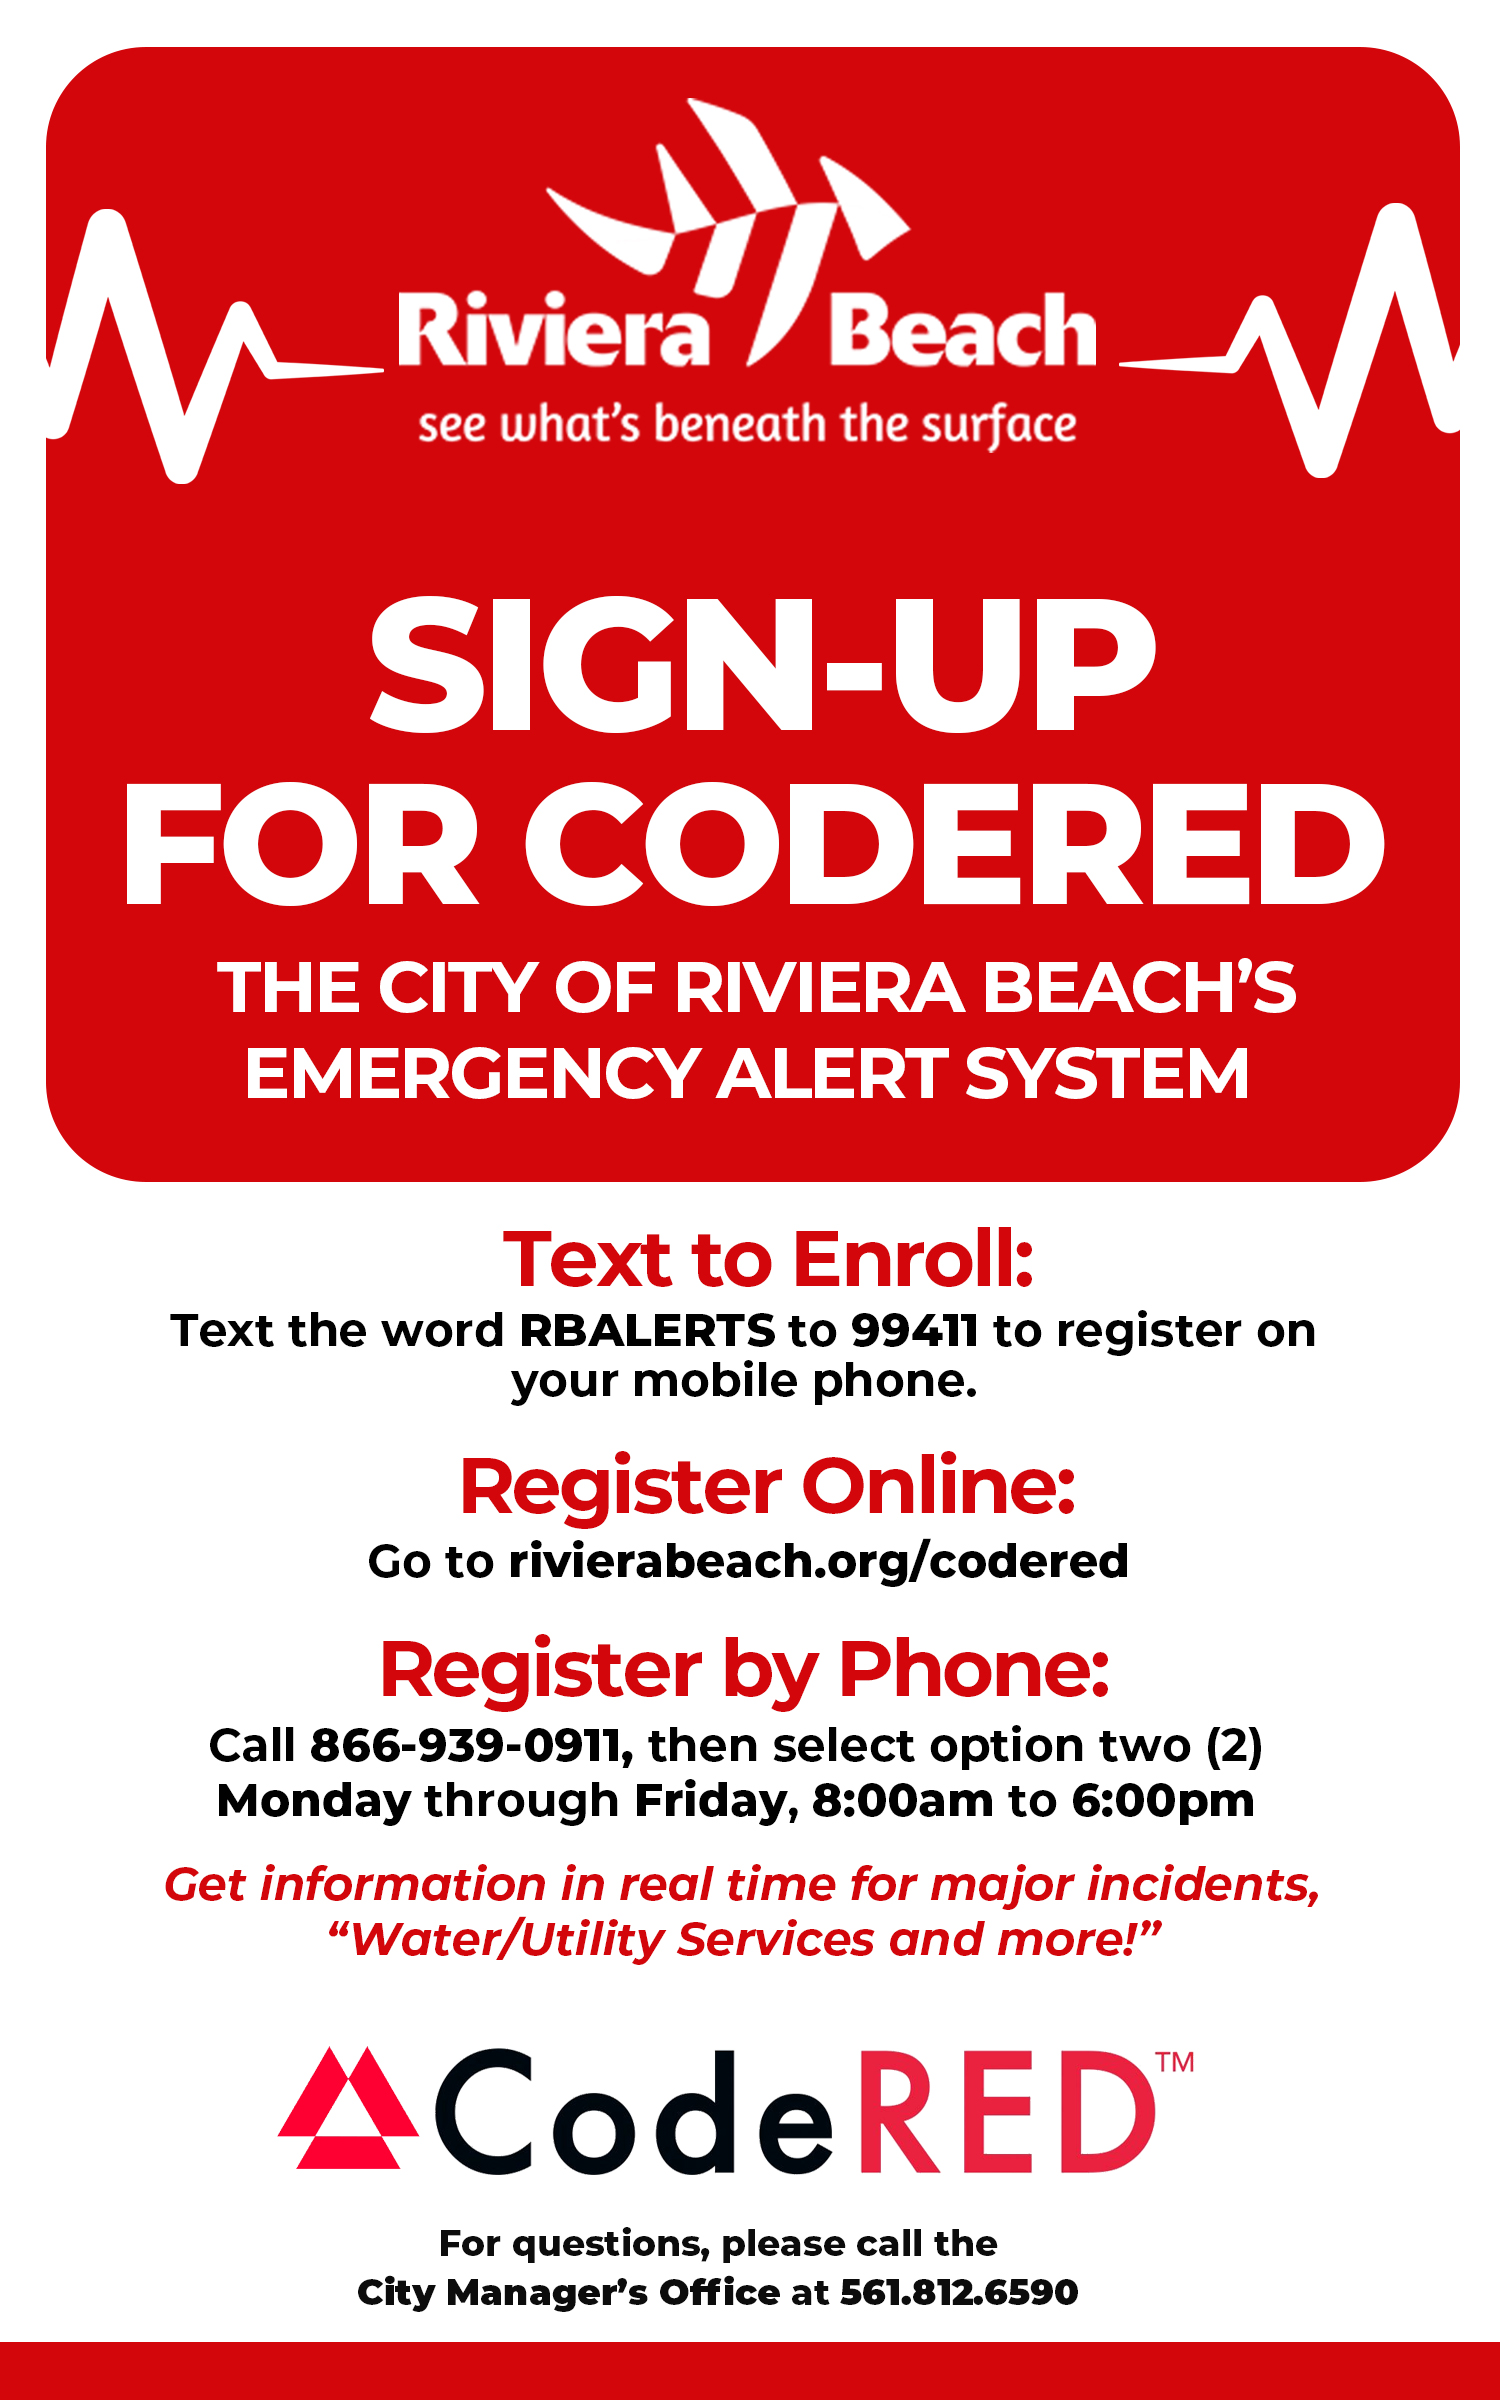 SIGN-UP FOR CODERED THE CITY OF RIVIERA BEACH'S EMERGENCY ALERT SYSTEM Text to Enroll: Text the word RBALERTS to 99411 to register on your mobile phone. Register Online: Go to rivierabeach.org/codered Register by Phone: Call 866-939-0911, then select option two (2) Monday through Friday, 8:00am to 6:00pm Get information in real time for major incidents, "Water/Utility Services and more!" ACodeRED™ For questions, please call the City Manager's Office at 561.812.6590